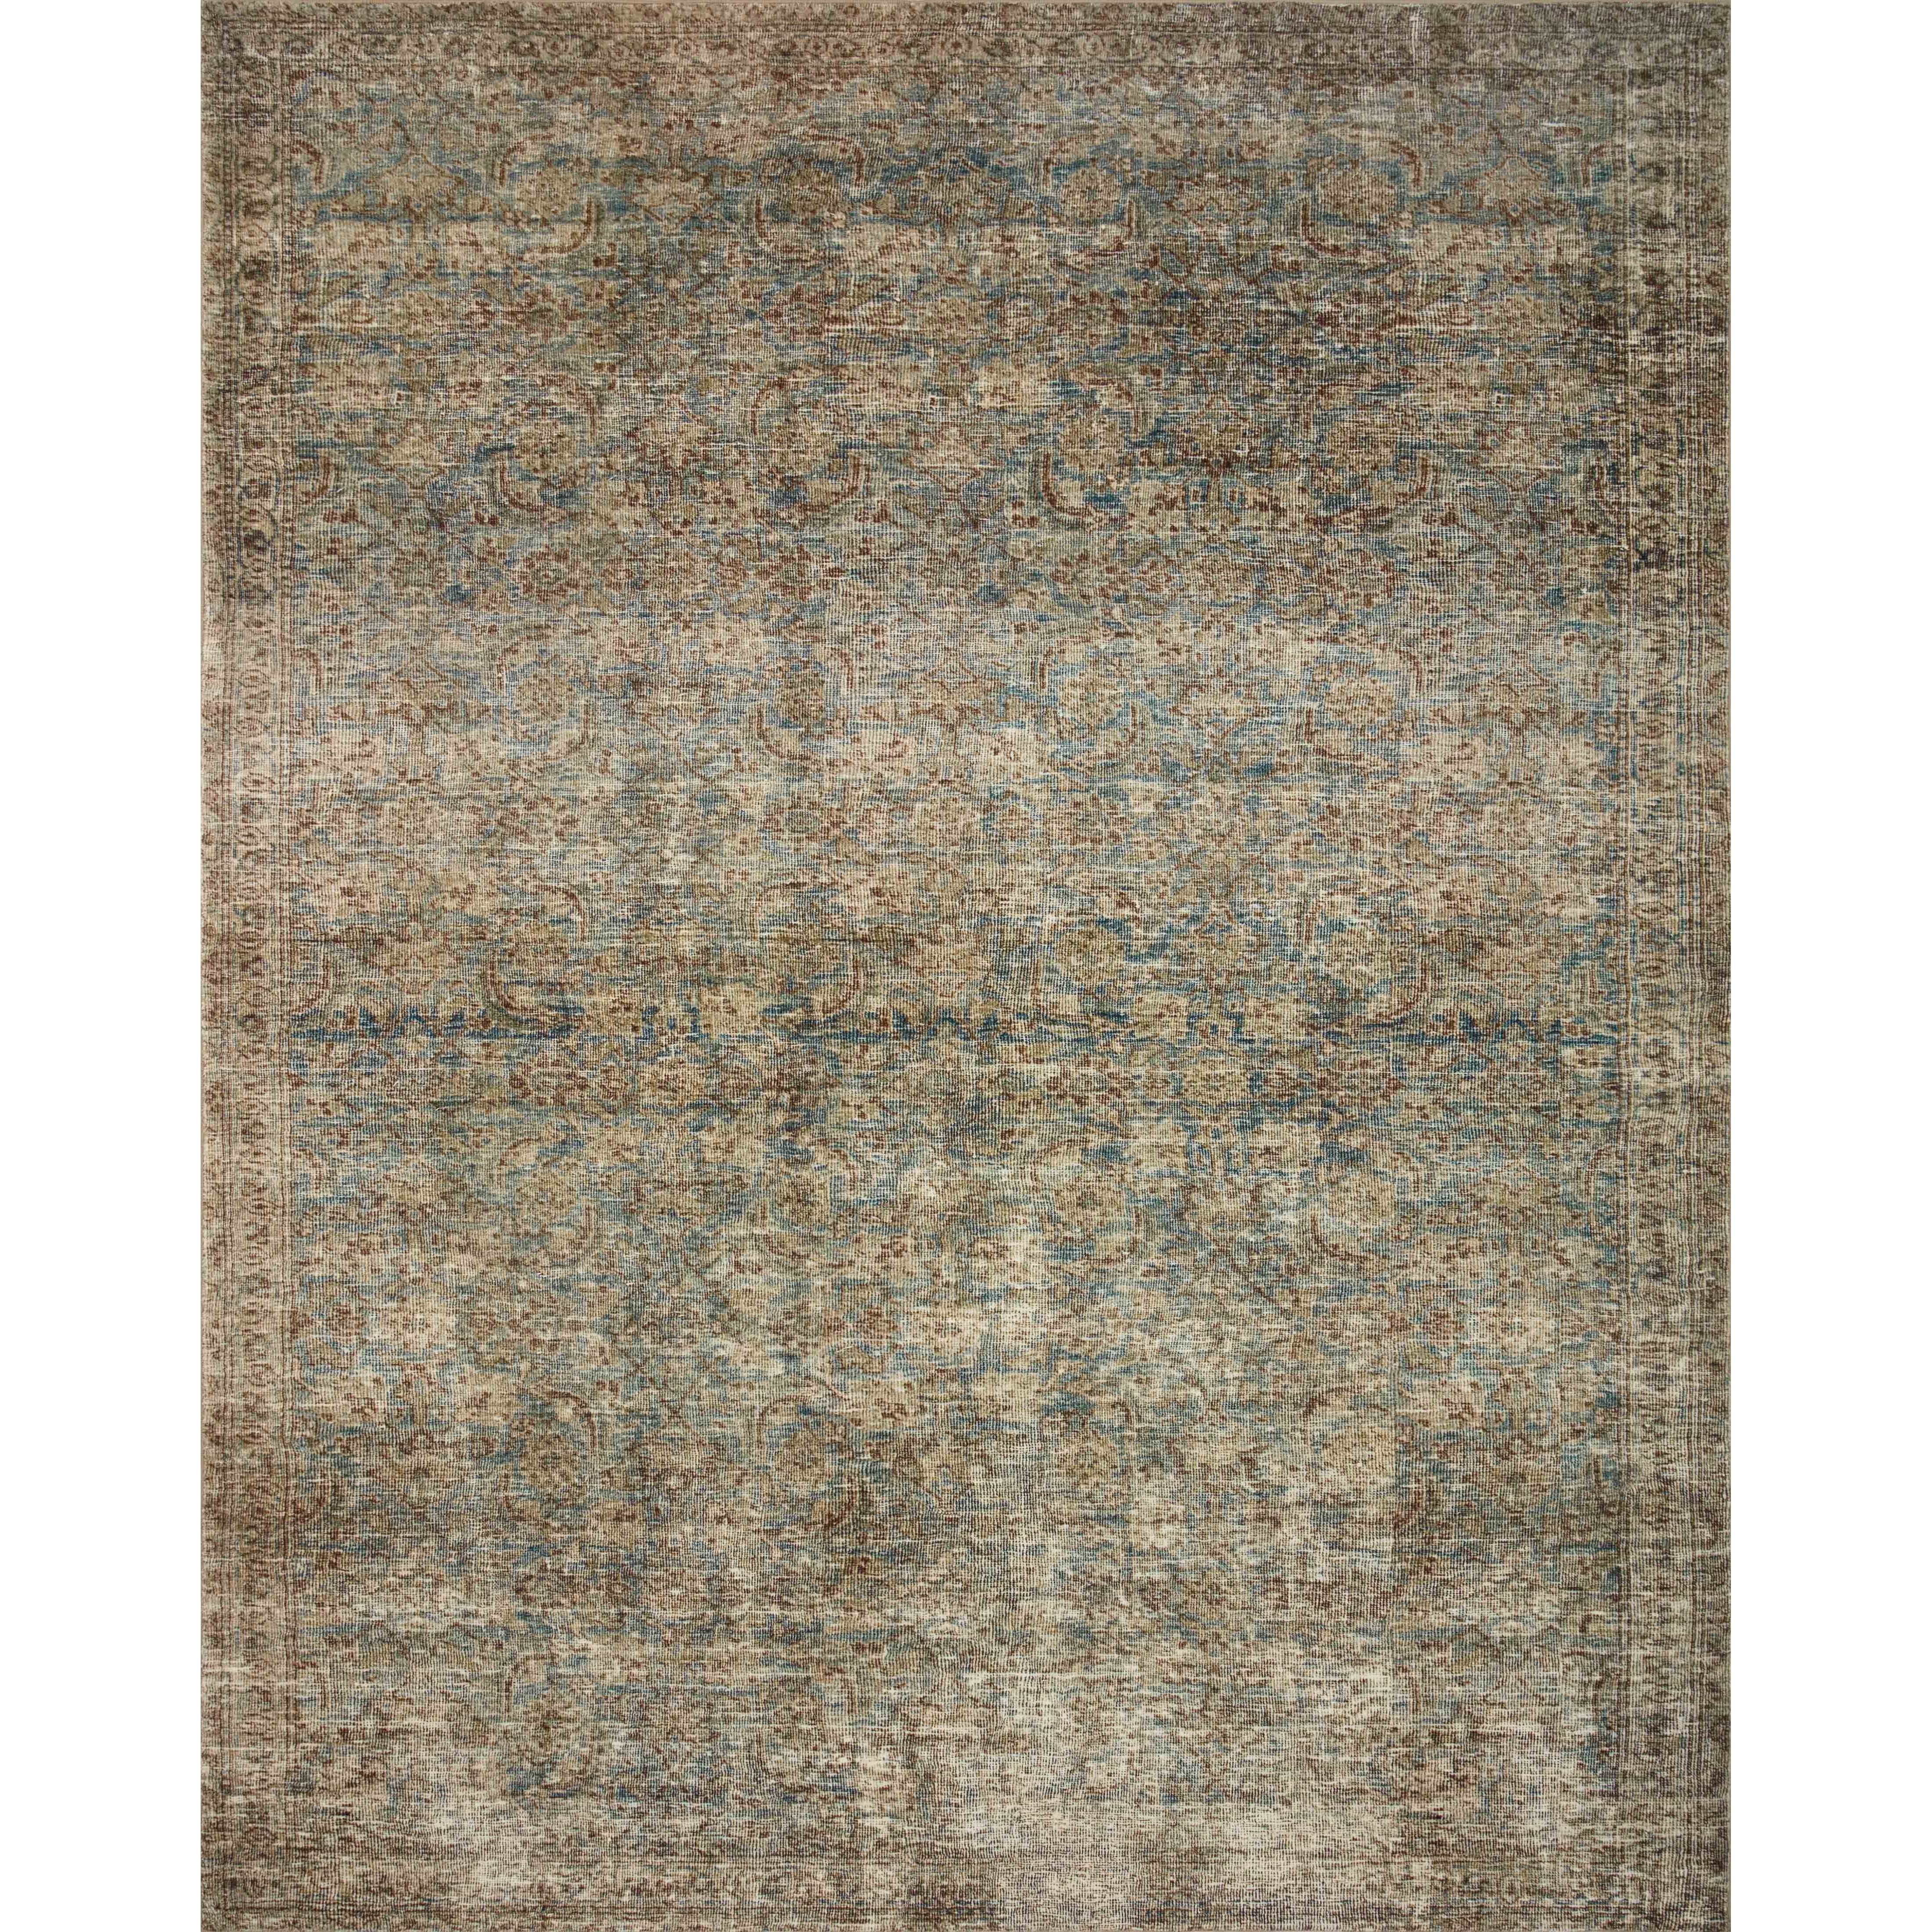 With the faded feel of an antique rug, the Amber Lewis x Loloi Morgan Sea / Sage Rug is a feat of modern printed construction. These impressive area rugs expertly blend sophisticated tones to recreate the dynamic colors of a vintage textiles. Power-loomed of CloudPile™ construction, these rugs are extra-soft to walk upon yet still durable for high-traffic rooms. Amethyst Home provides interior design services, furniture, rugs, and lighting in the Portland metro area.